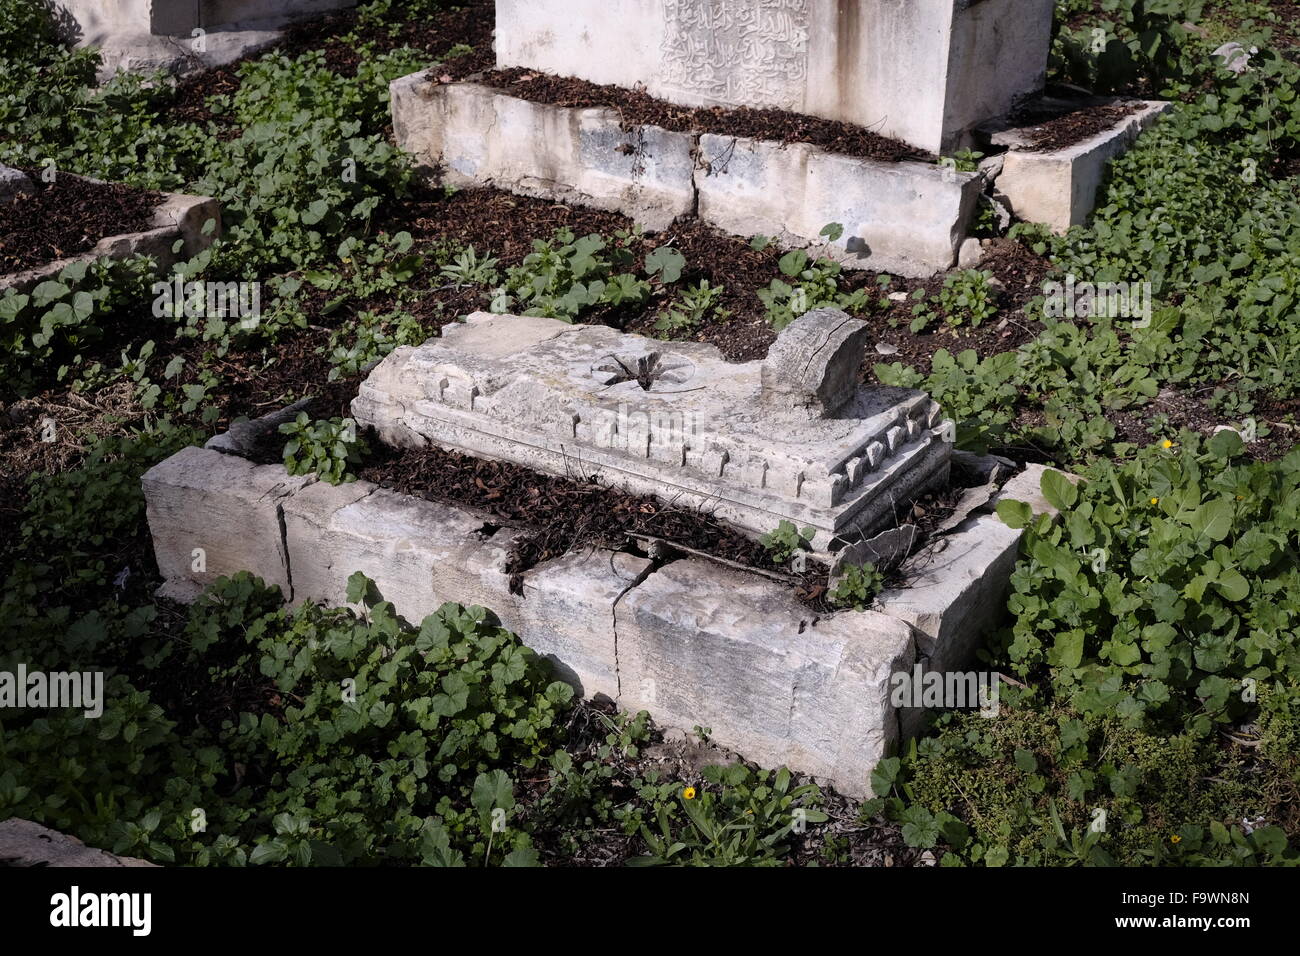 Old tombstones at the Mamilla Cemetery a historic Muslim cemetery located in the center of west Jerusalem Israel. The cemetery contains the remains of figures from the early Islamic period, Sufi shrines and Mamluk era tombs. Stock Photo